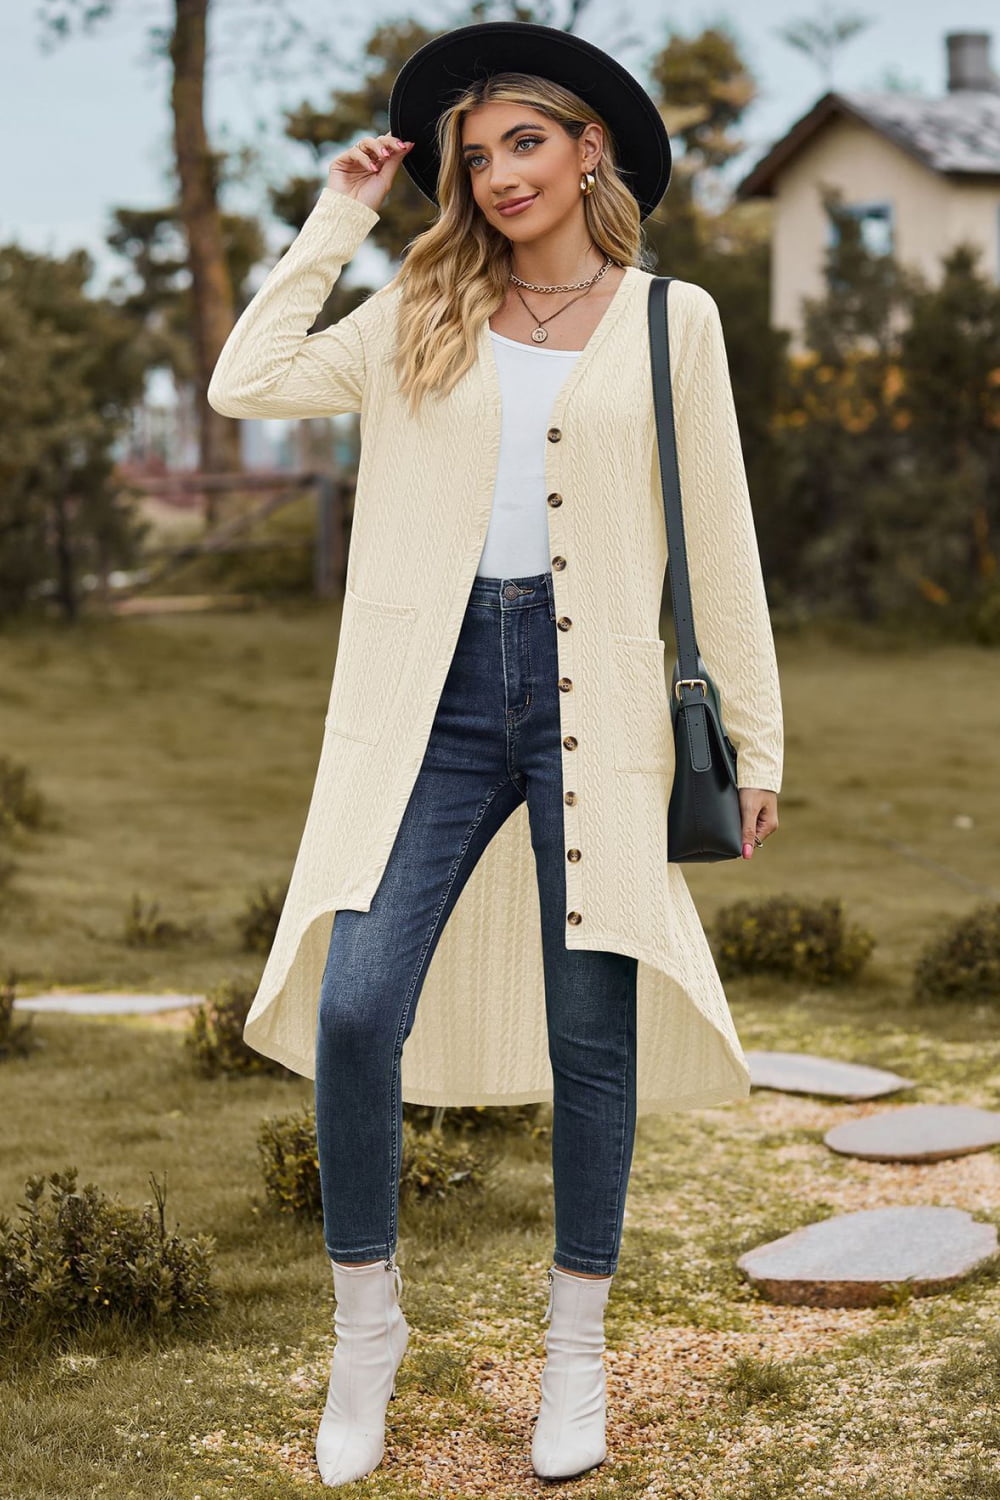 V-Neck Long Sleeve Cardigan with Pocket - White / S - Women’s Clothing & Accessories - Shirts & Tops - 9 - 2024